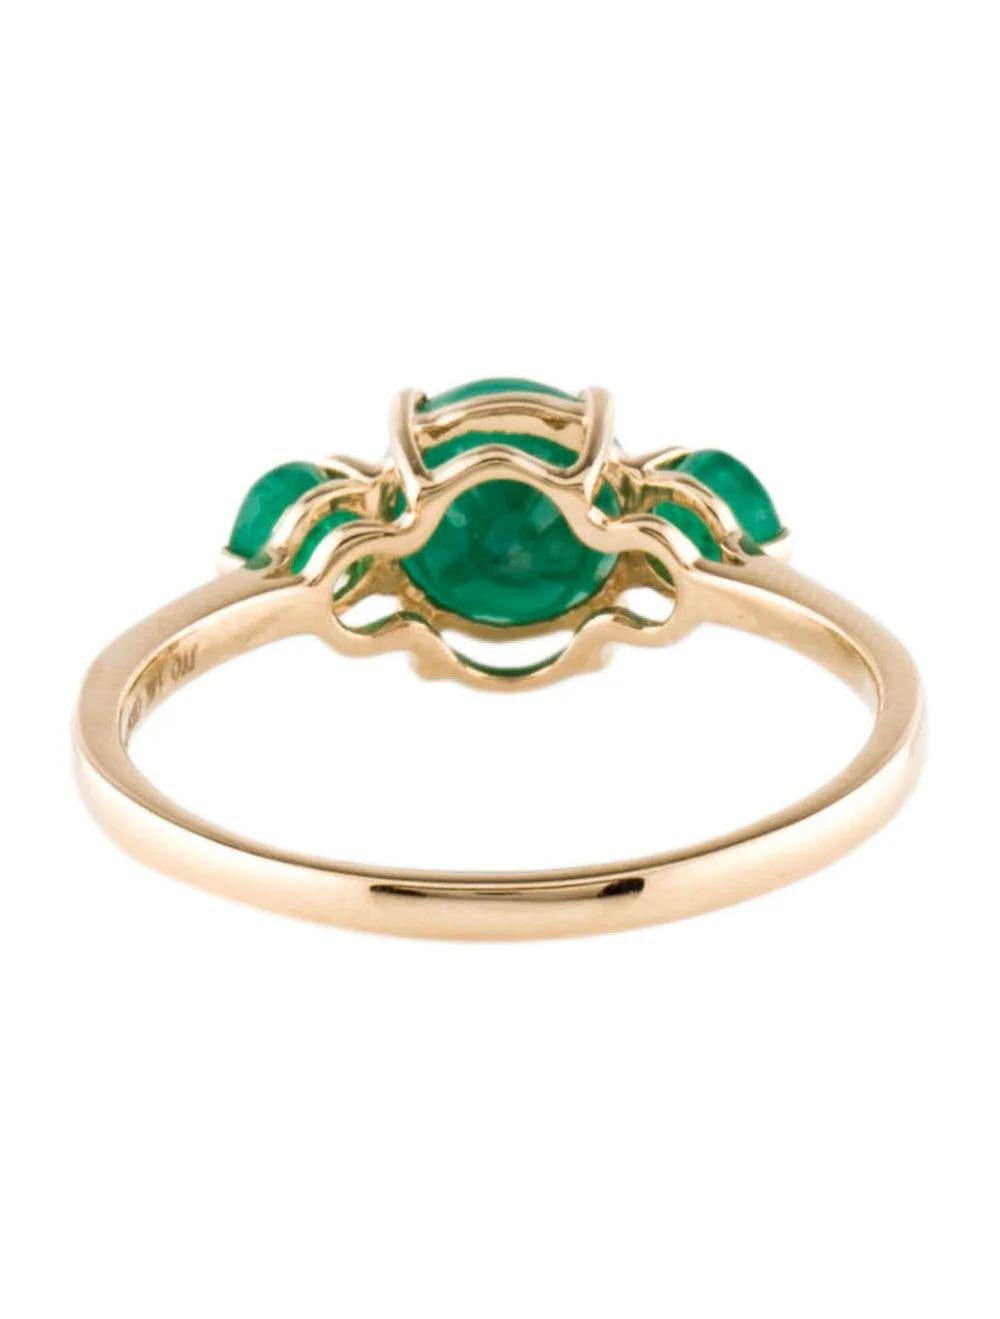 14K Emerald Cocktail Ring, Size 6.75, Stunning Yellow Gold, Genuine Gemstone In New Condition For Sale In Holtsville, NY